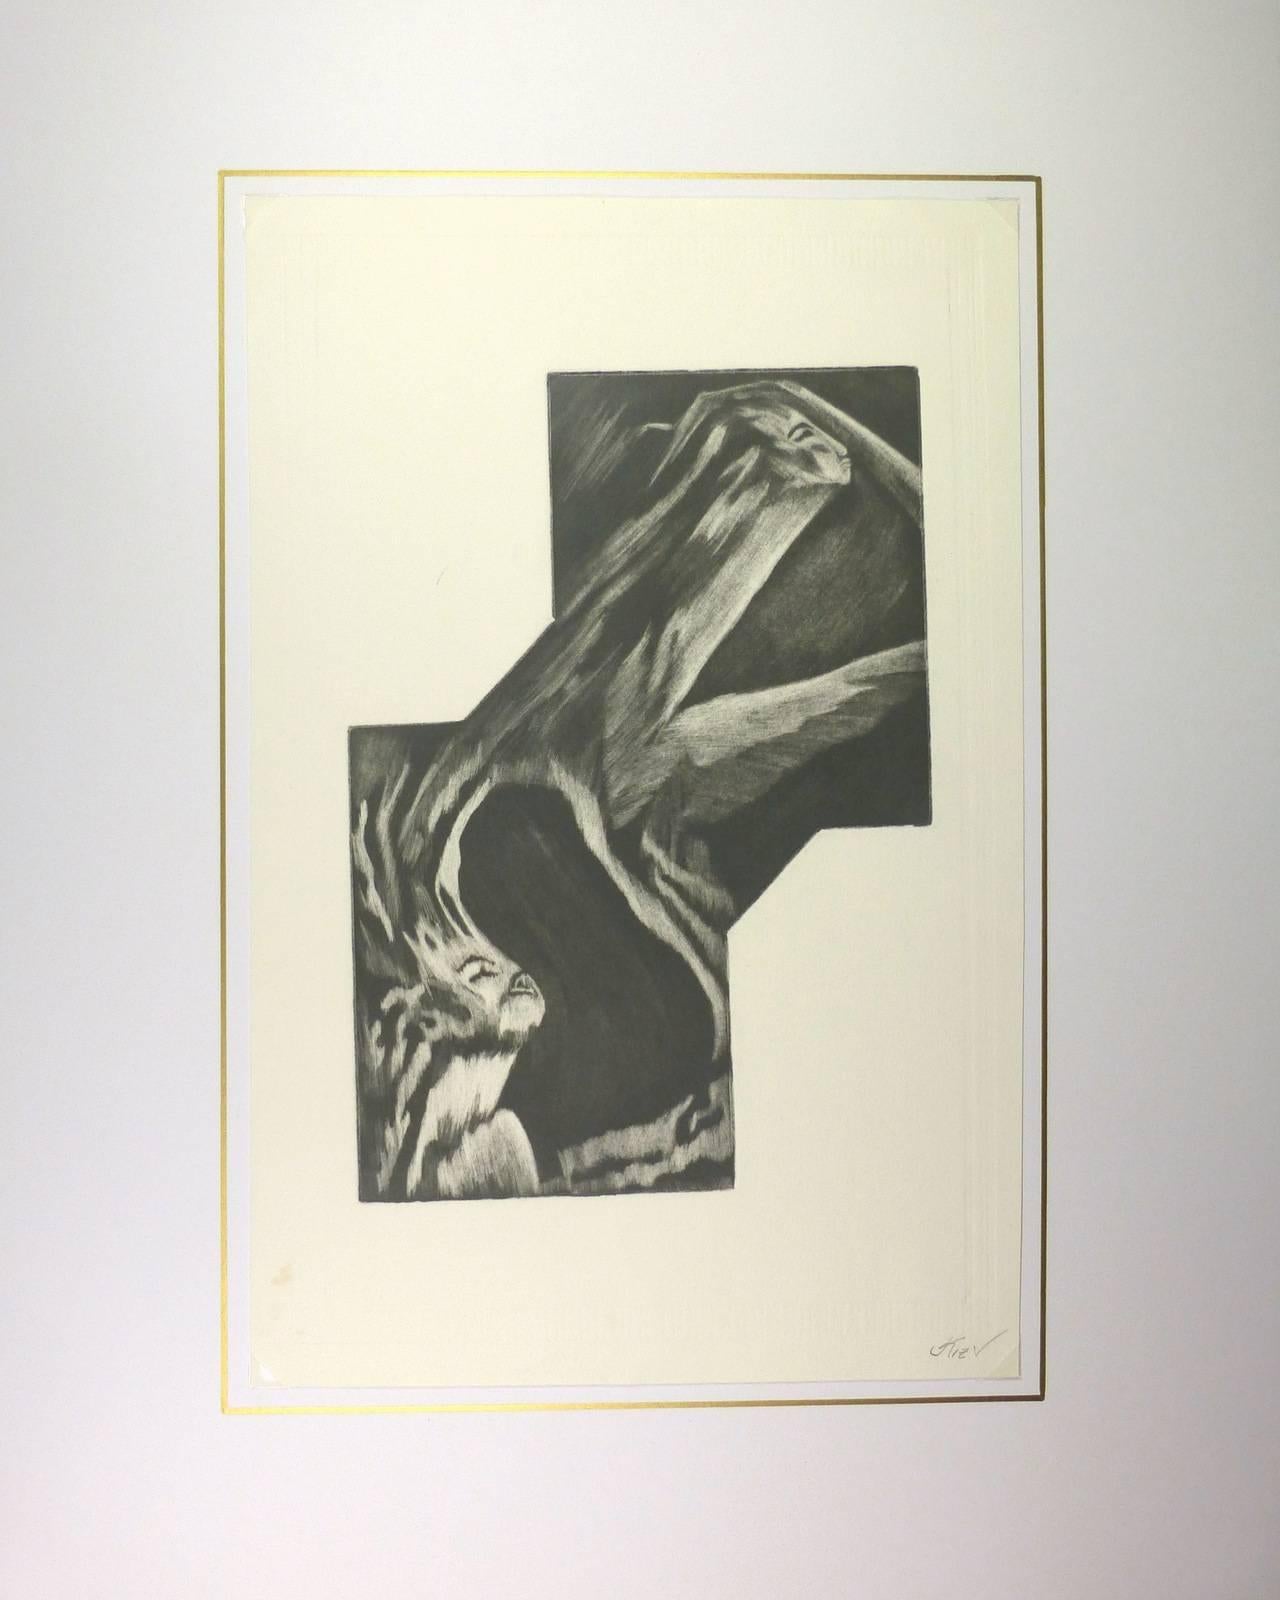 Black and white abstract monotype by American artist Kismine Varner, circa 1990. Signed lower right.

Original artwork on paper displayed on a white mat with a gold border. Archival plastic sleeve and Certificate of Authenticity included. Artwork,